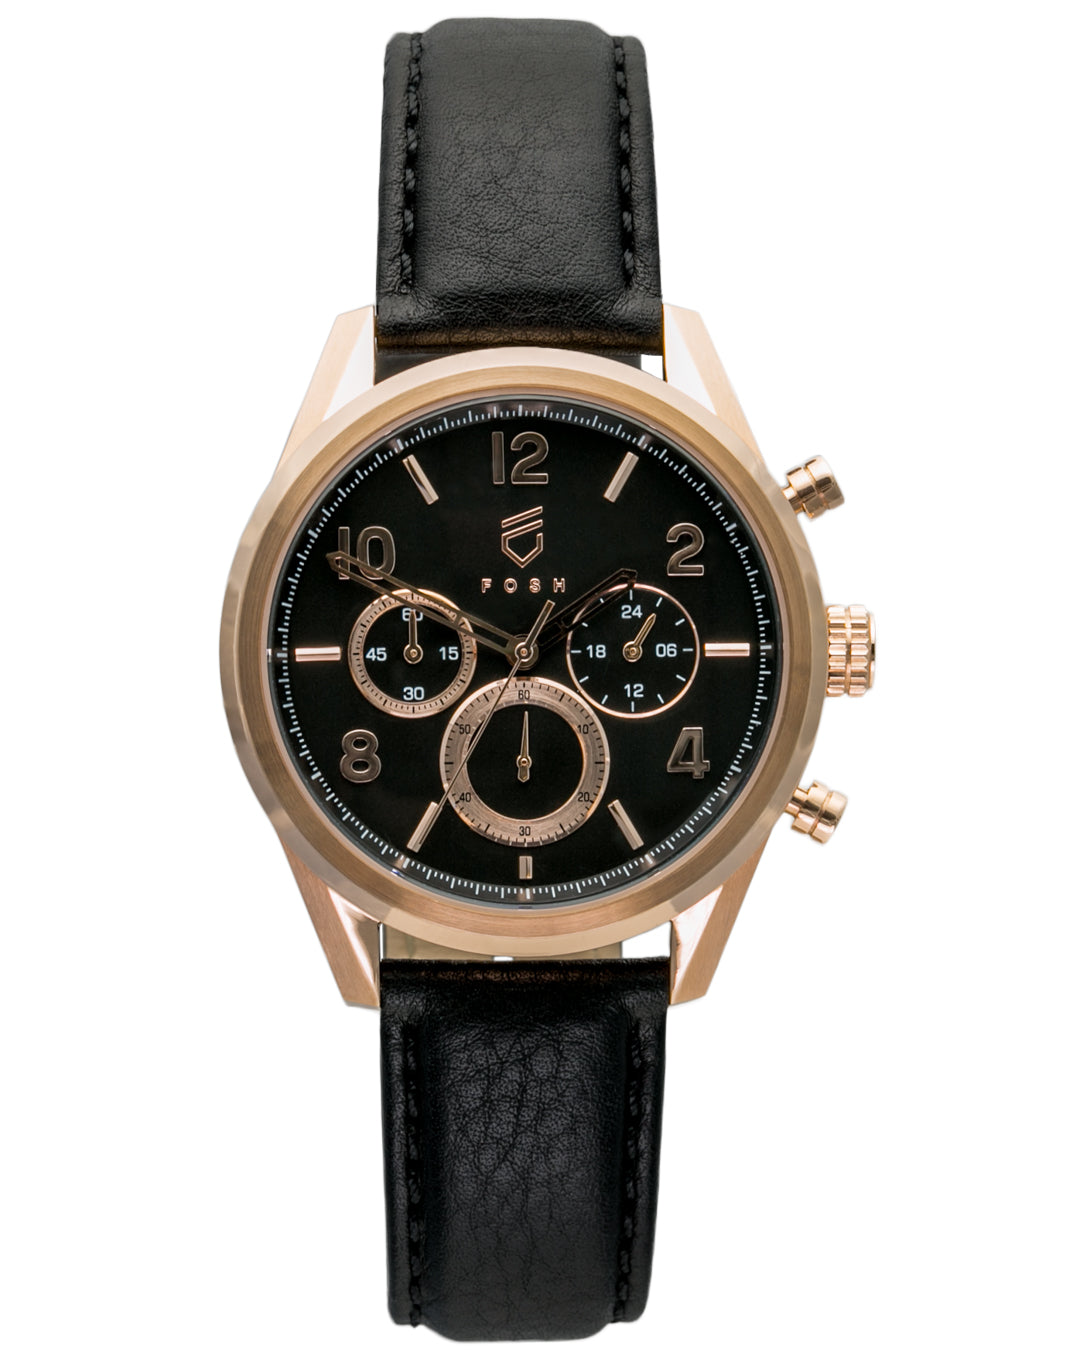 Rose gold and black chronograph watch with three hands and interchangeable leather straps